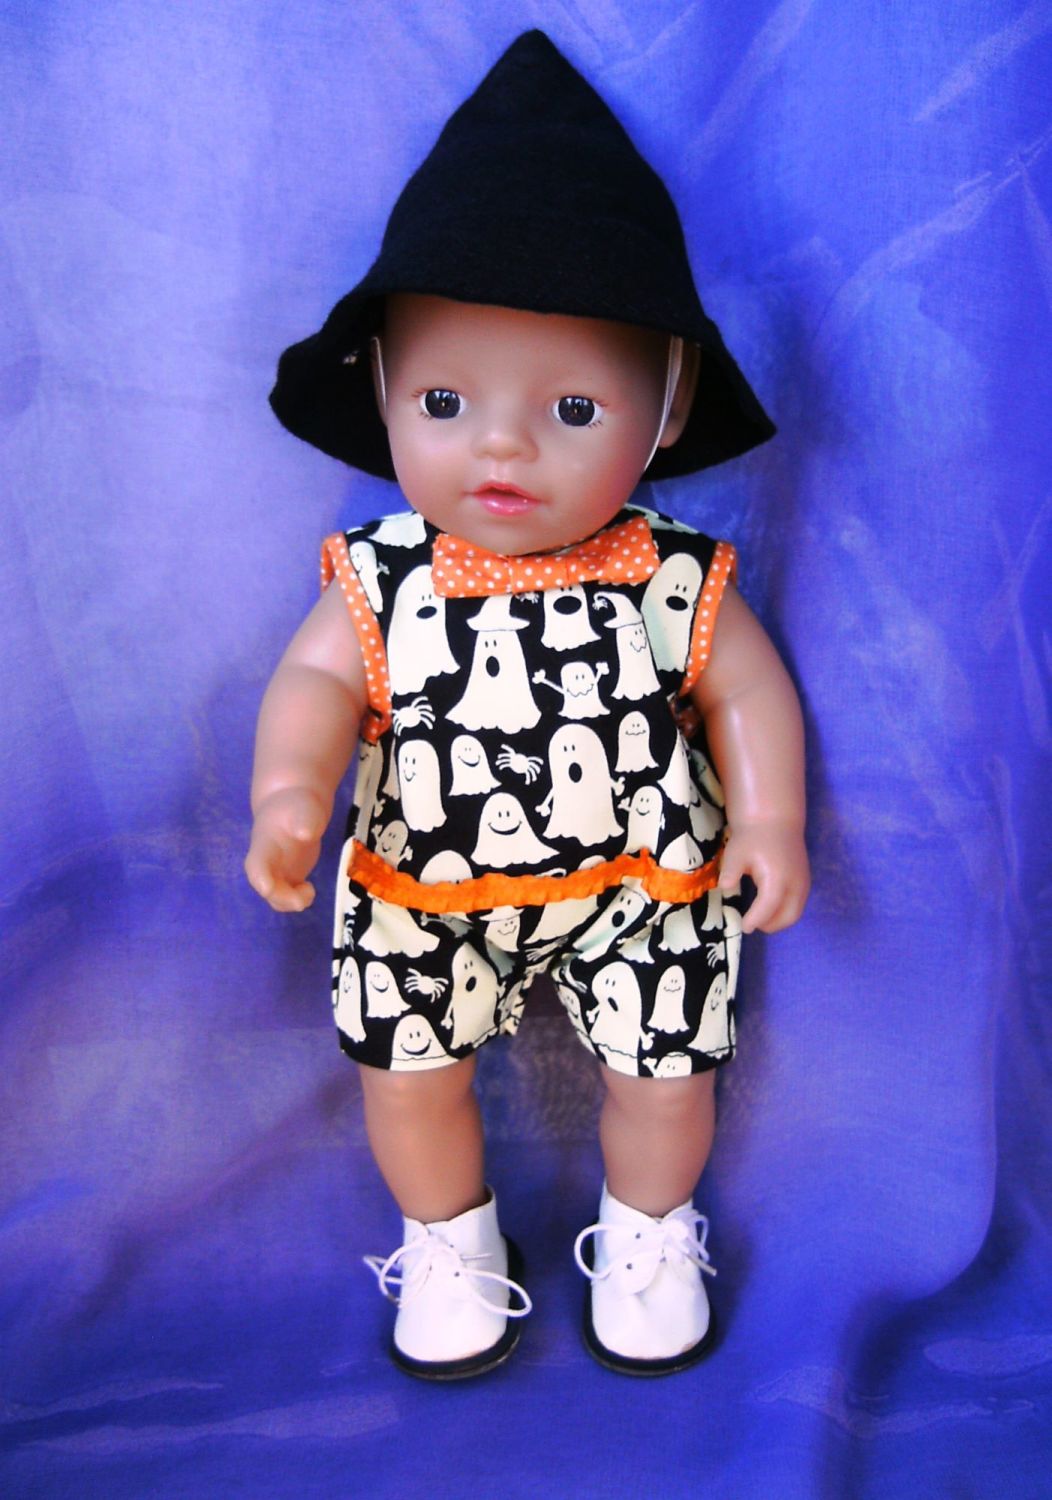 Halloween outfit to fit 12 inch baby doll